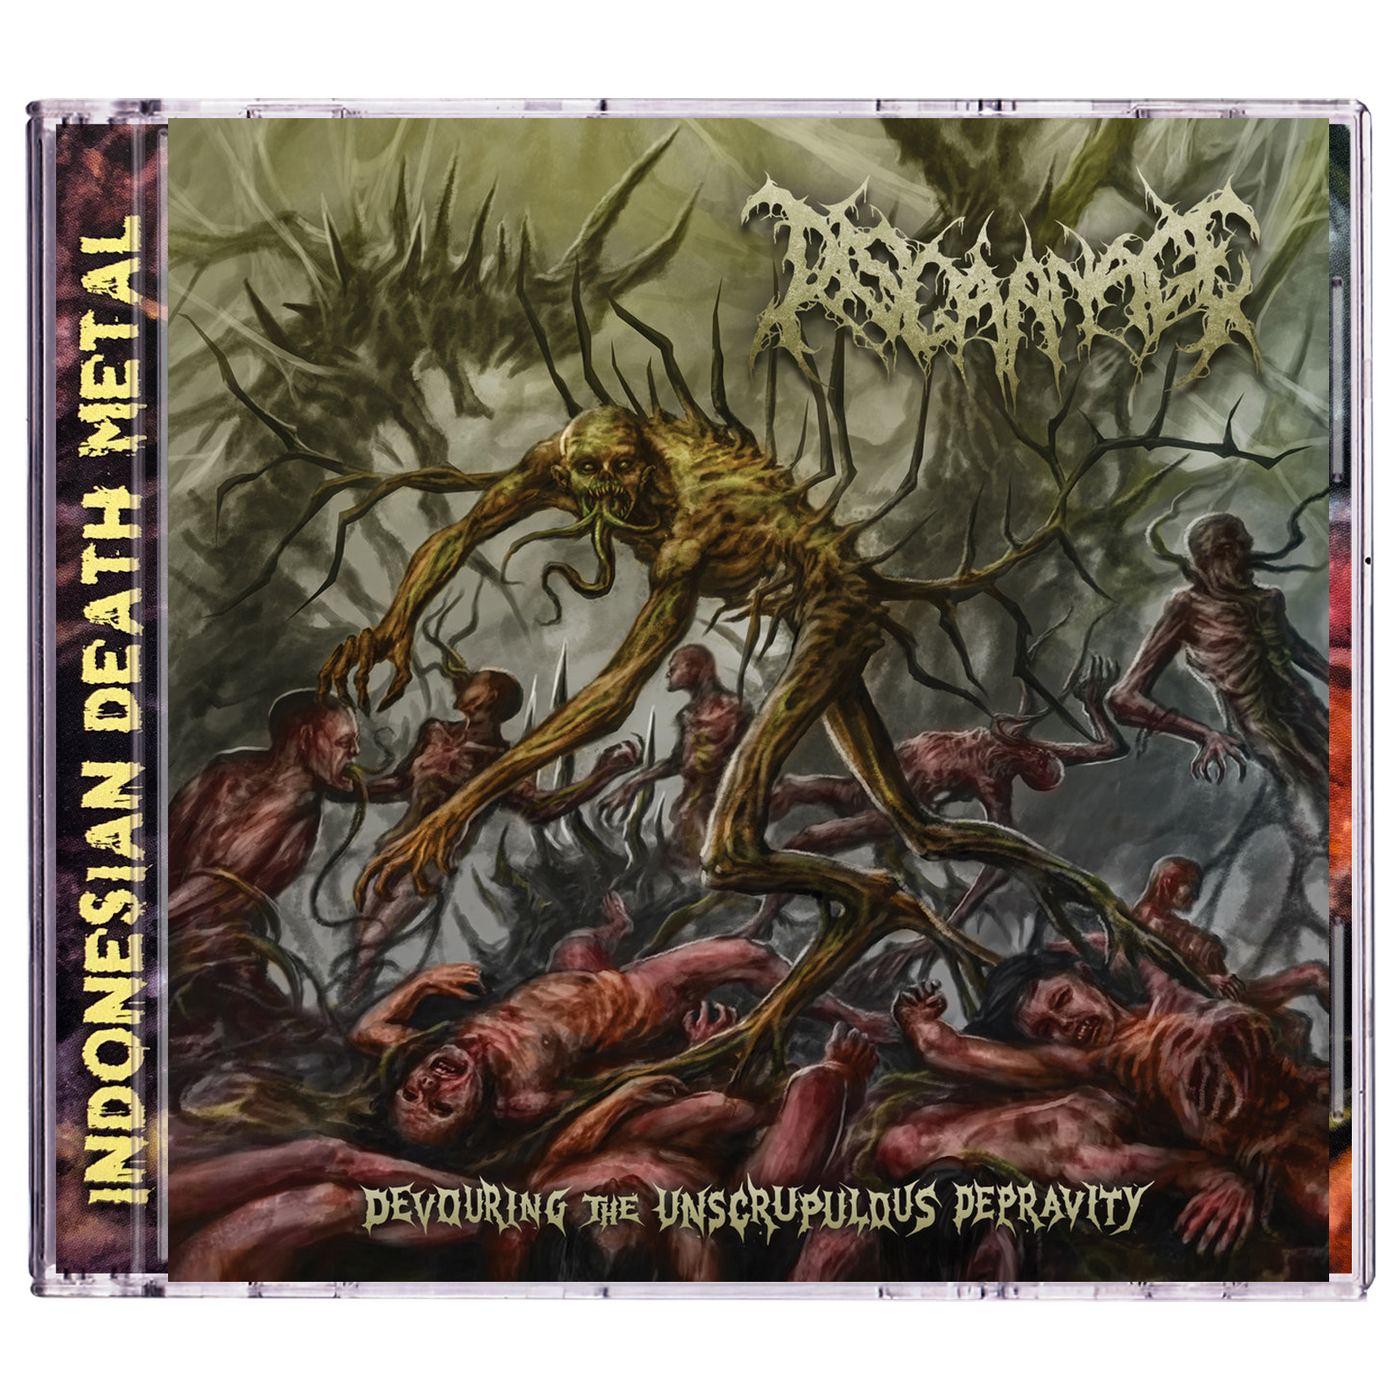 Discarnage 'Devouring The Unscrupulous Depravity' CD